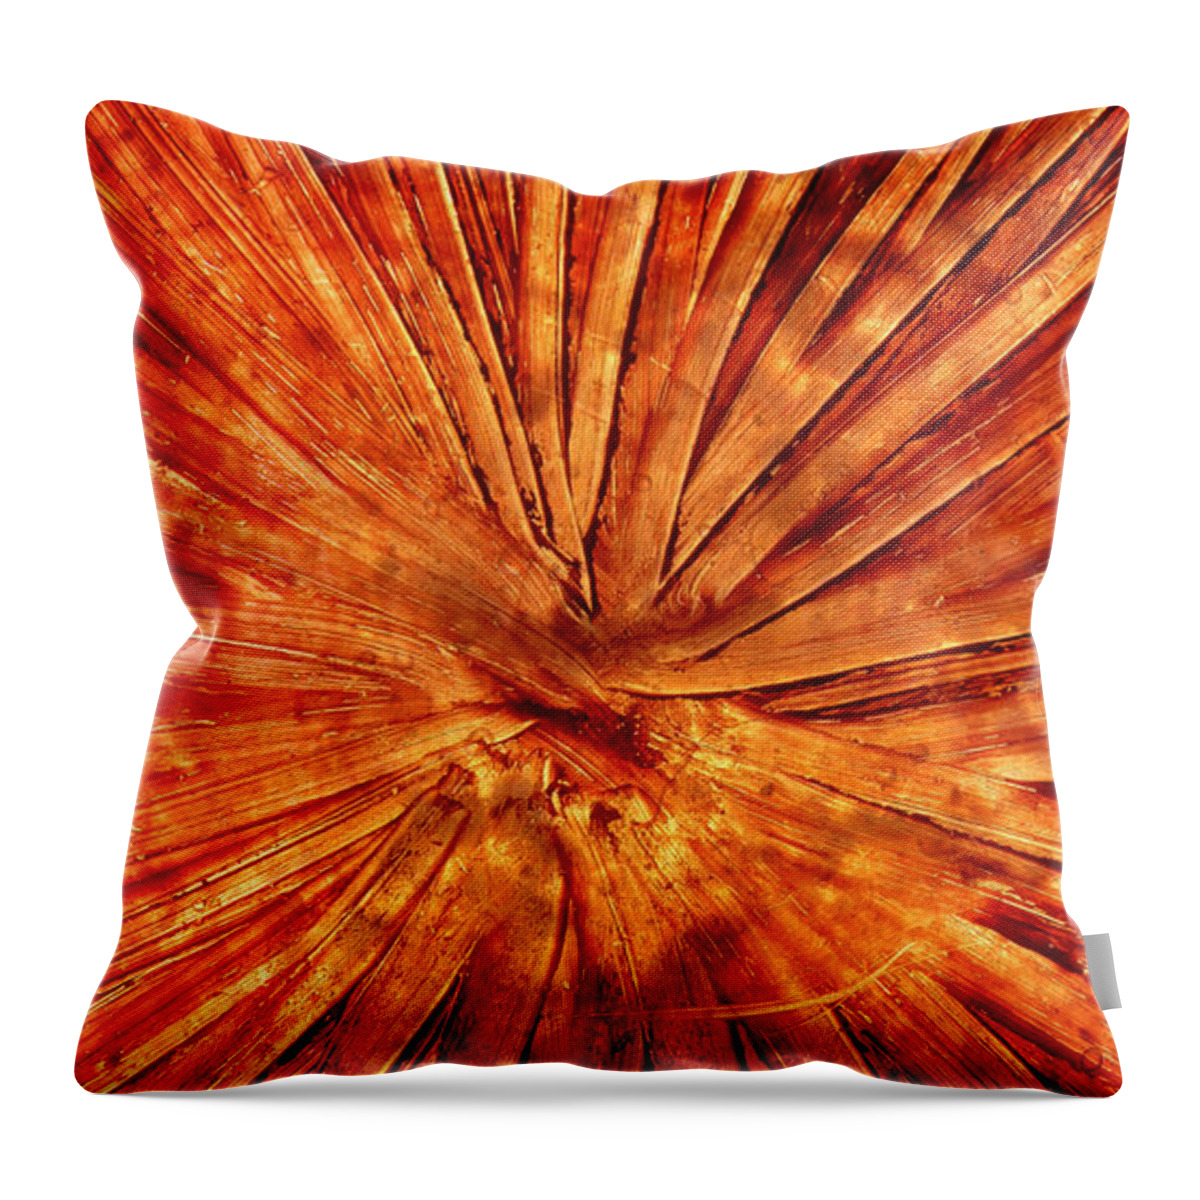 Radiance Throw Pillow featuring the mixed media Radiance by Sami Tiainen